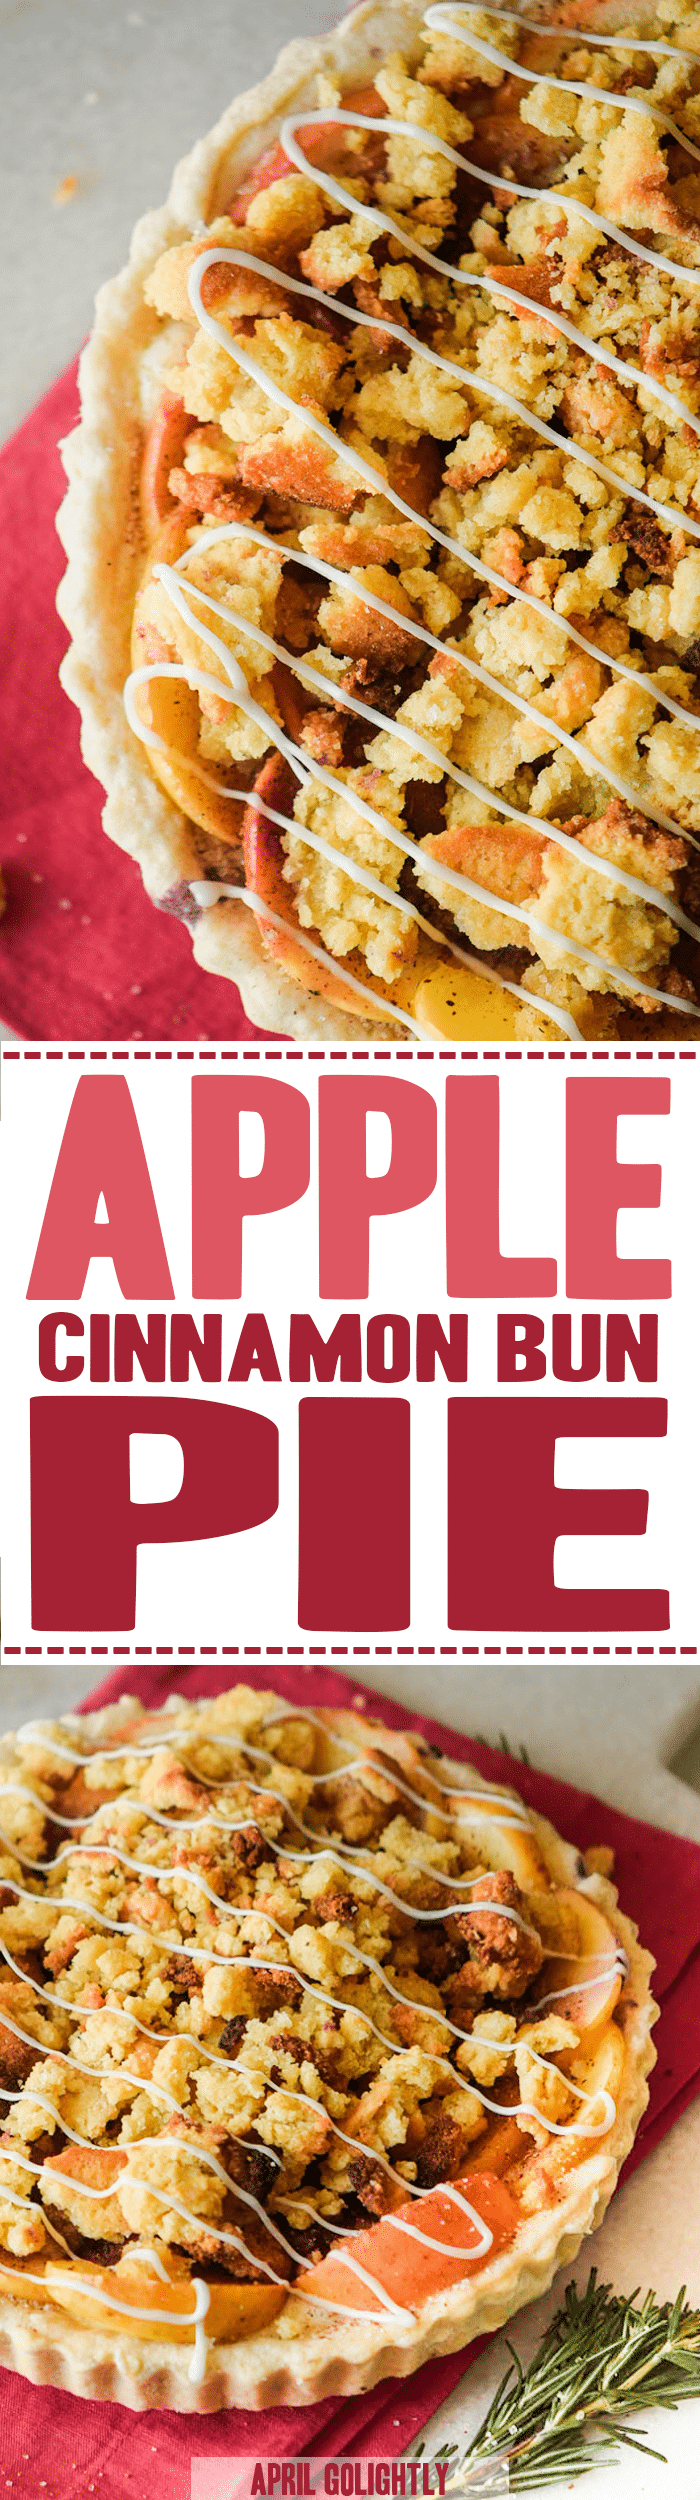 Apple Cinnamon Buns Pie Recipe homemade from scratch - extremely easy baking with fresh apples for a Thanksgiving or fall dessert